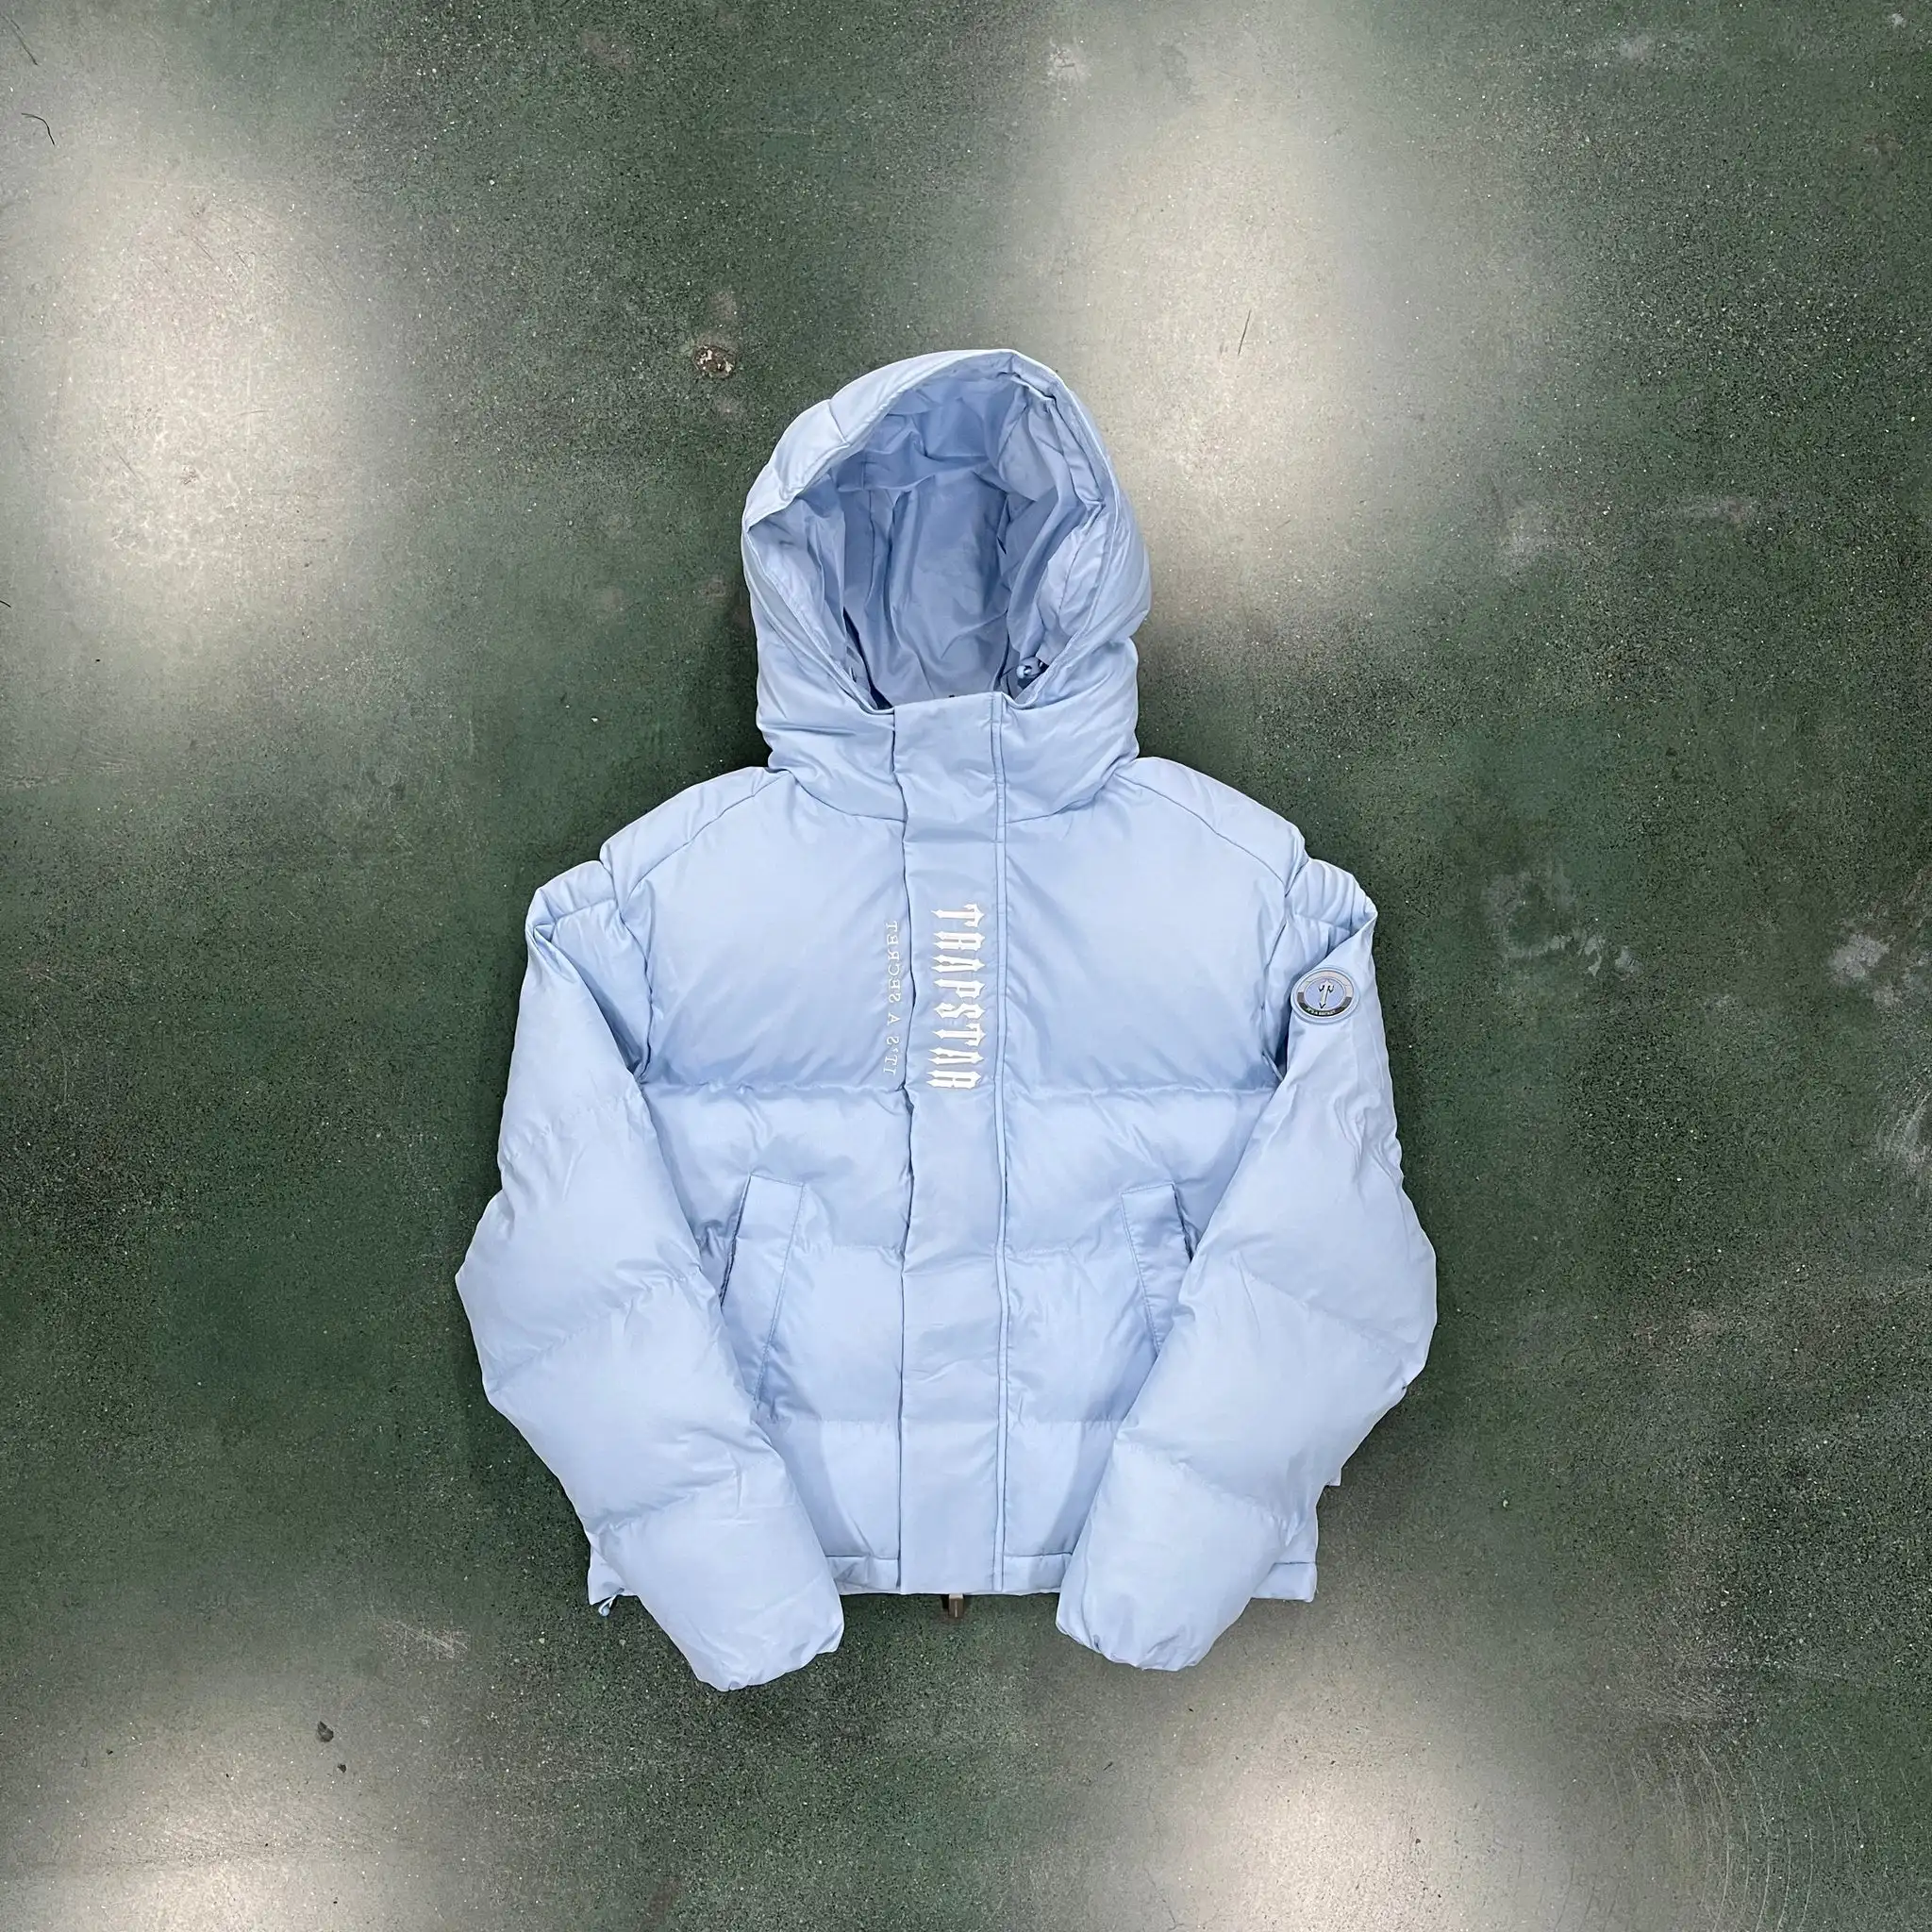 

Trapstar London Decoded Hooded Puffer 2.0 - Ice Blue Jacket Men Top Quality Embroidered Thermal Hoodie Men Winter Coat Tops